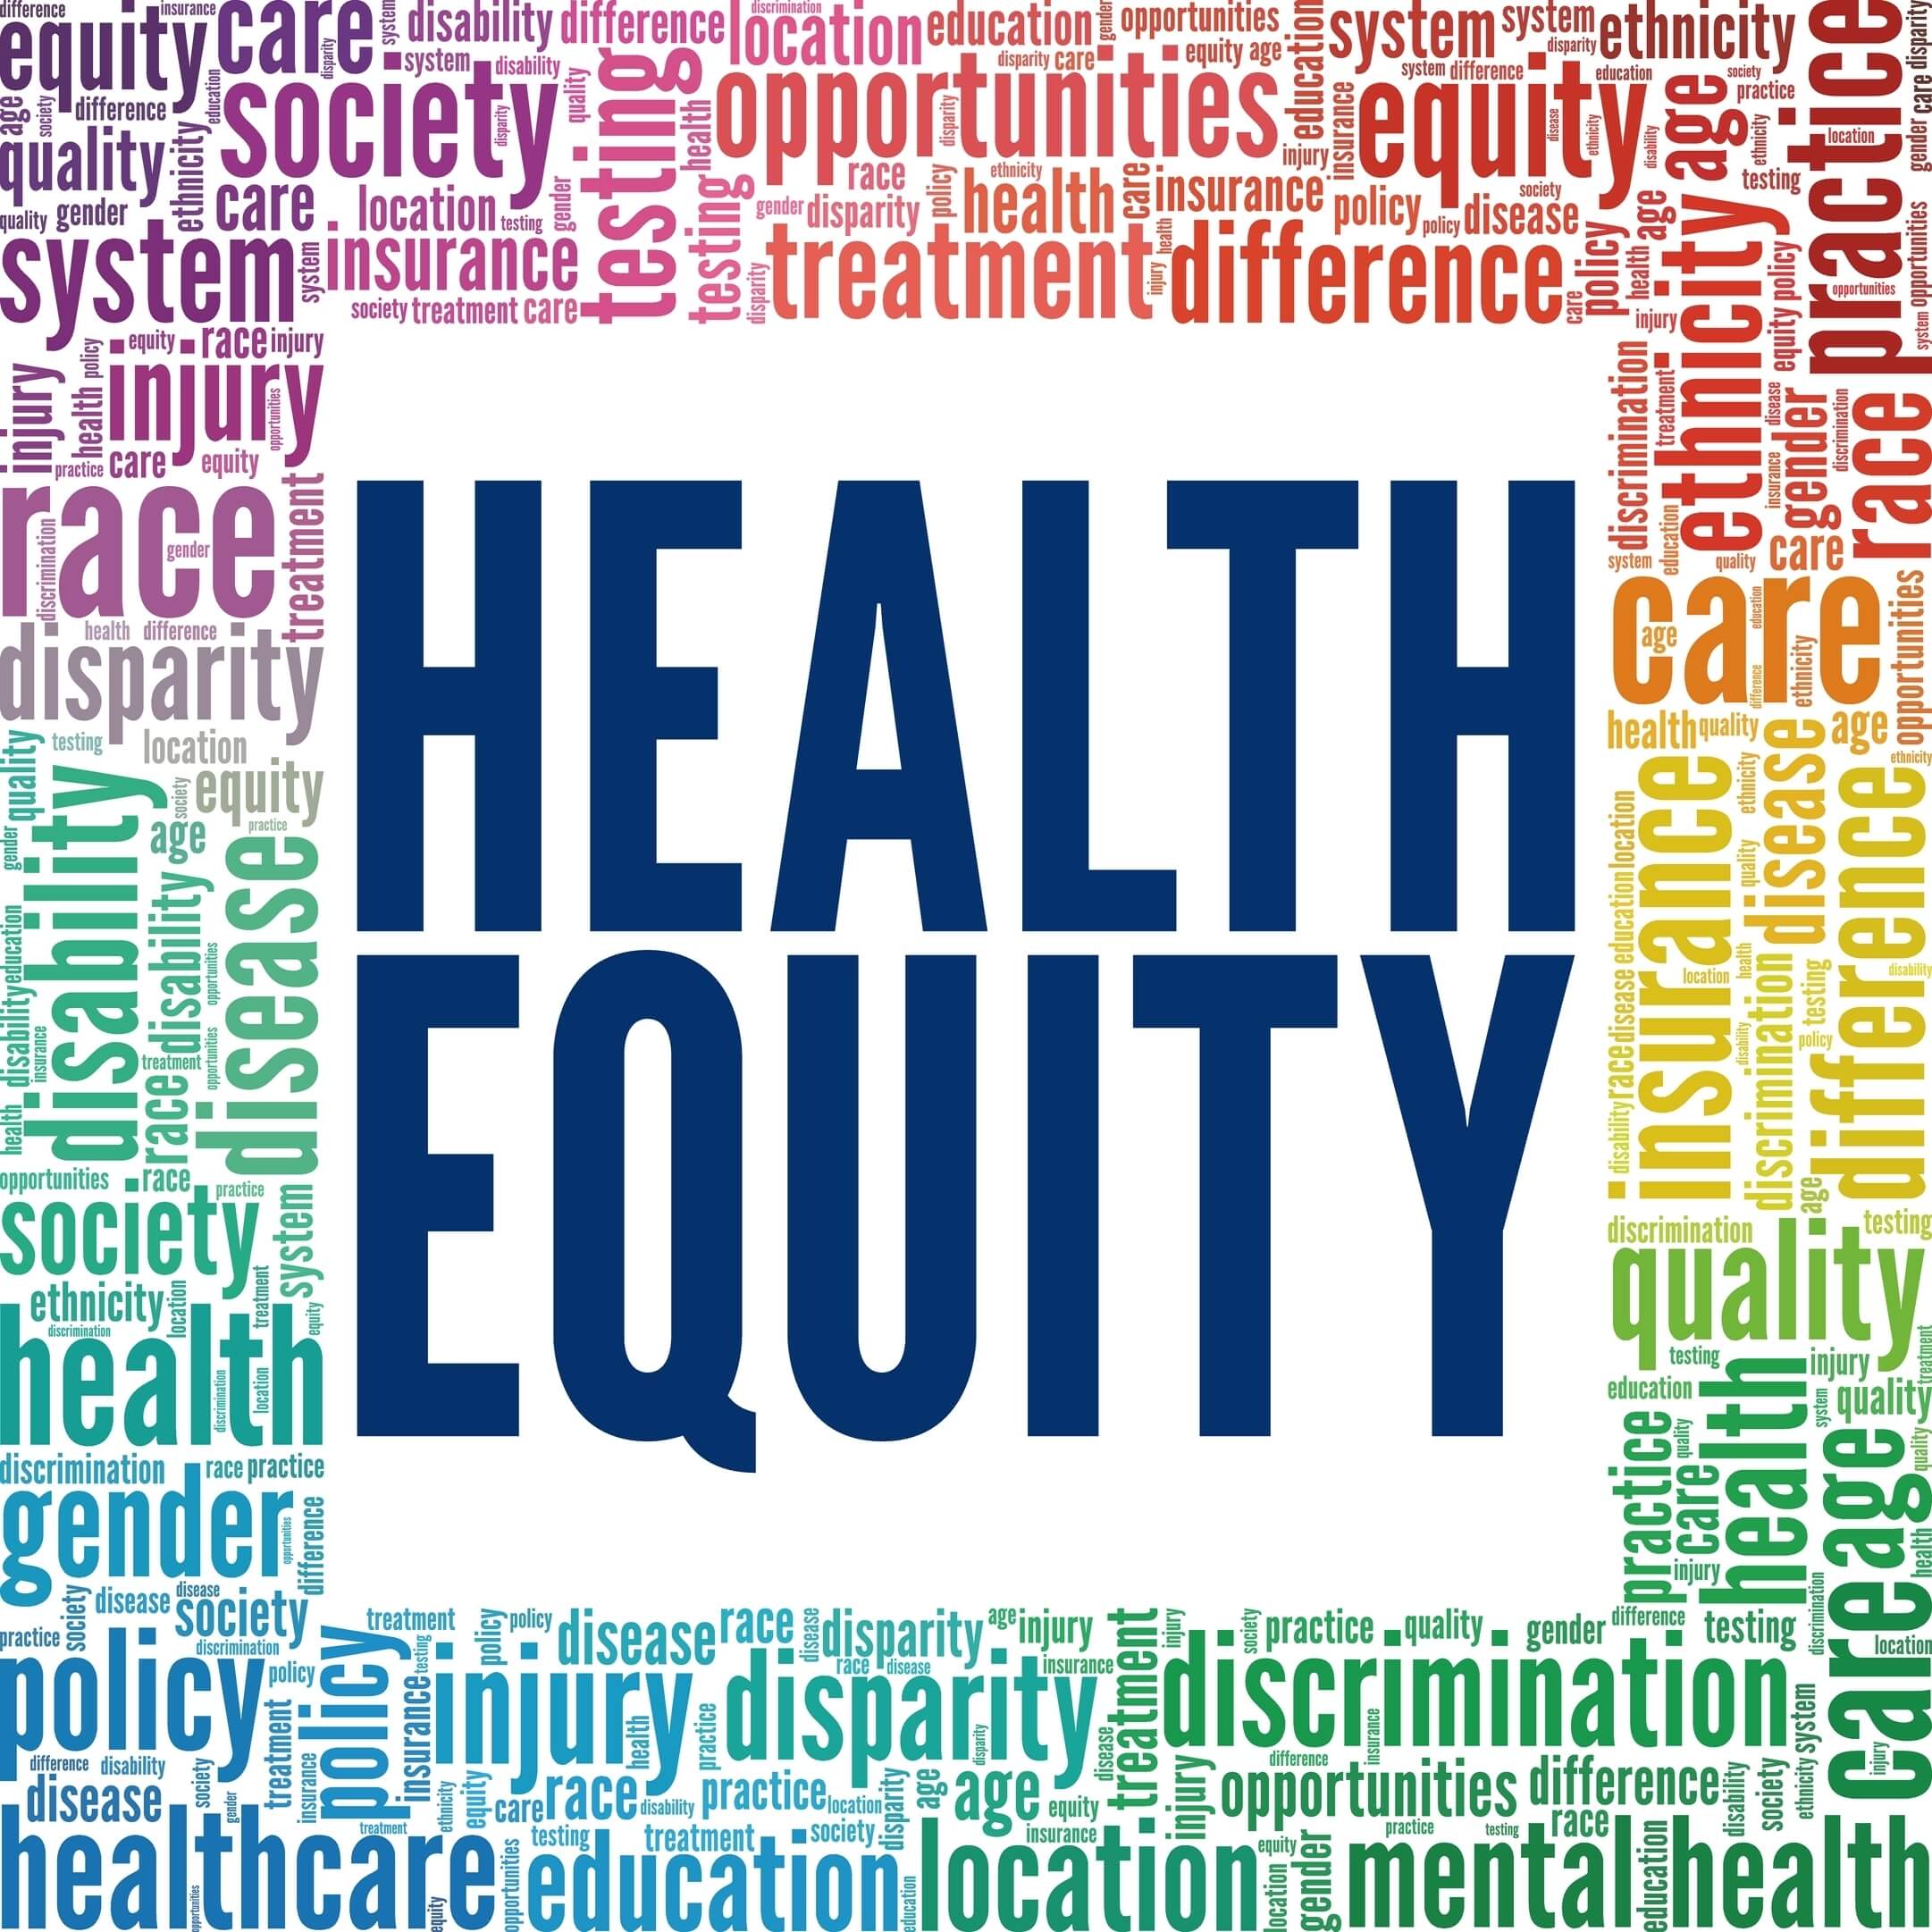 An Indianapolis Health System’s $60 Million Health Equity Initiative